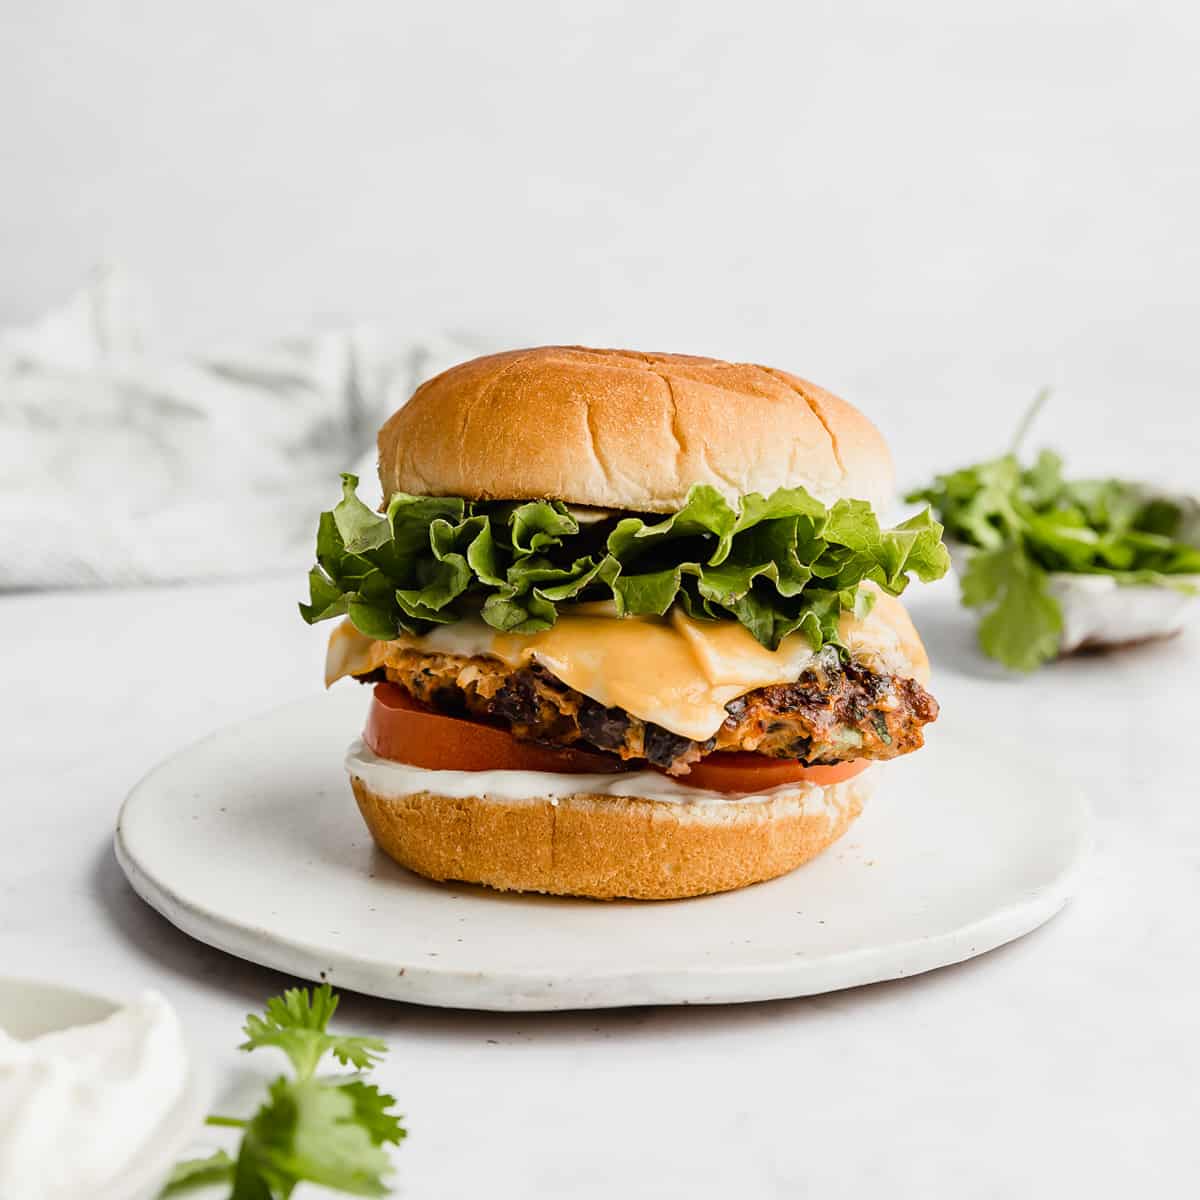 A Taco Turkey Burger on a bun with lettuce and tomatoes and orange cheese, against a white background.